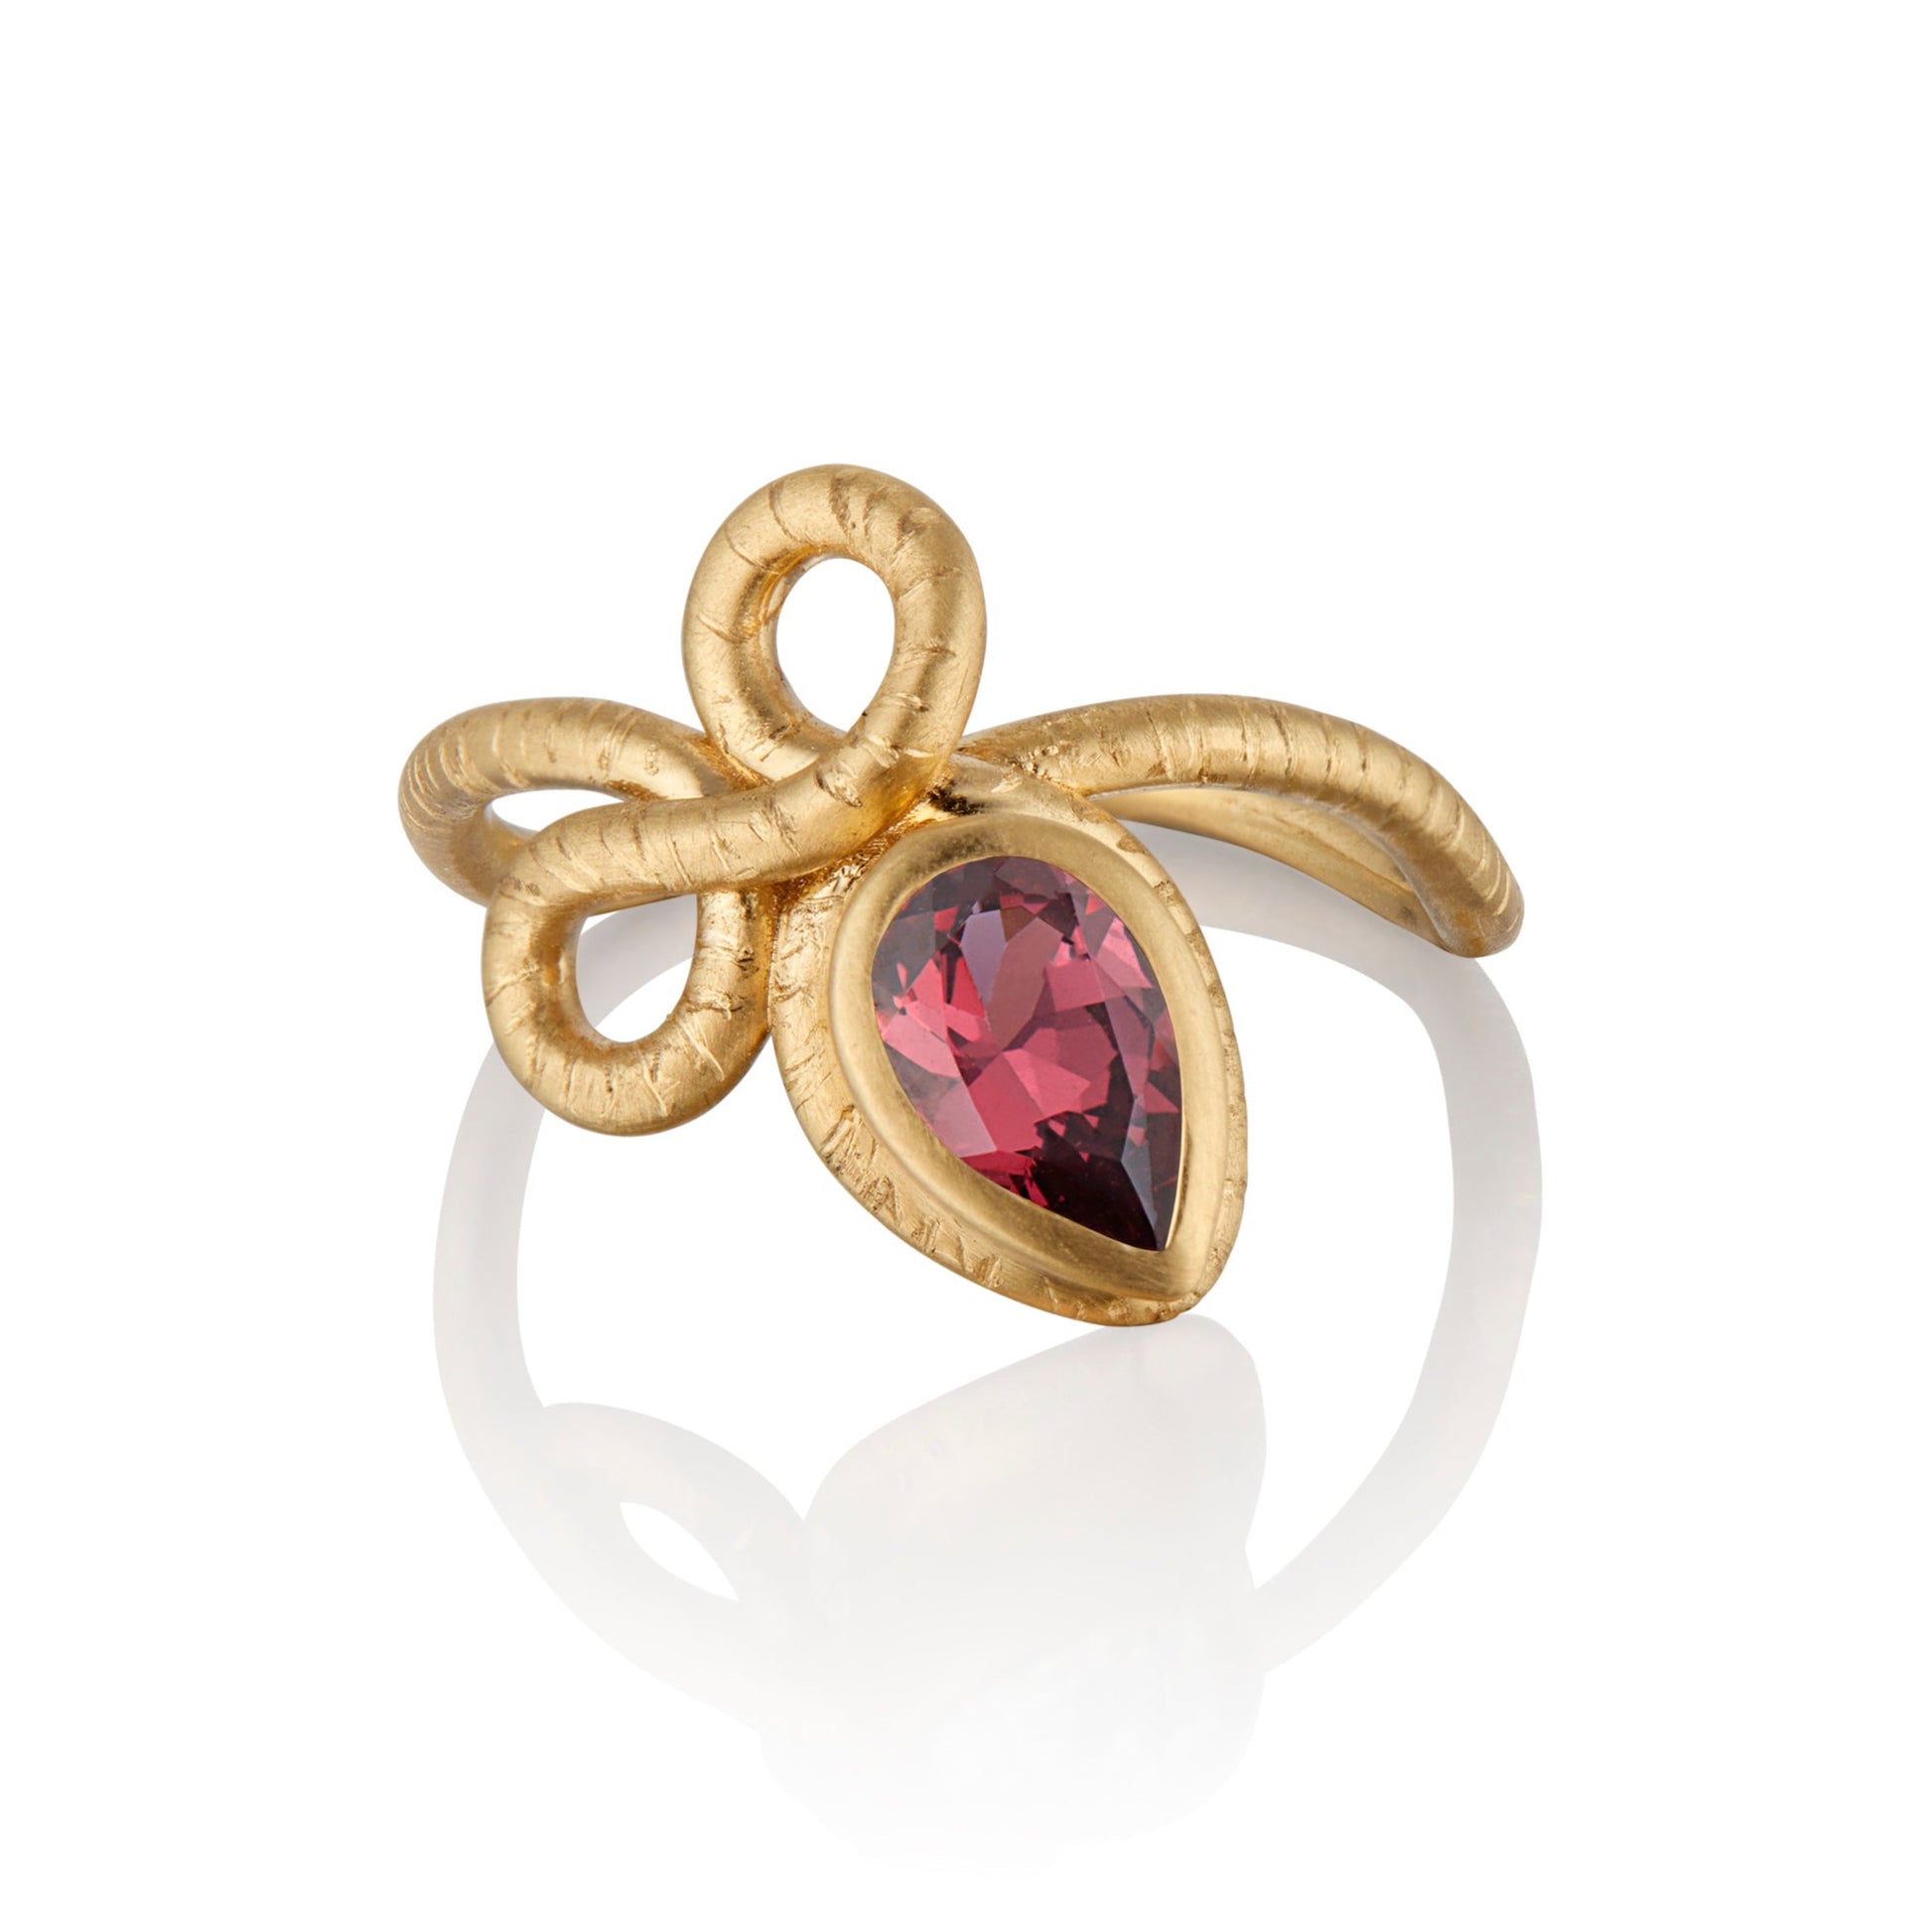 The Promise Ring with Rhodolite Garnet, January's Birthstone.